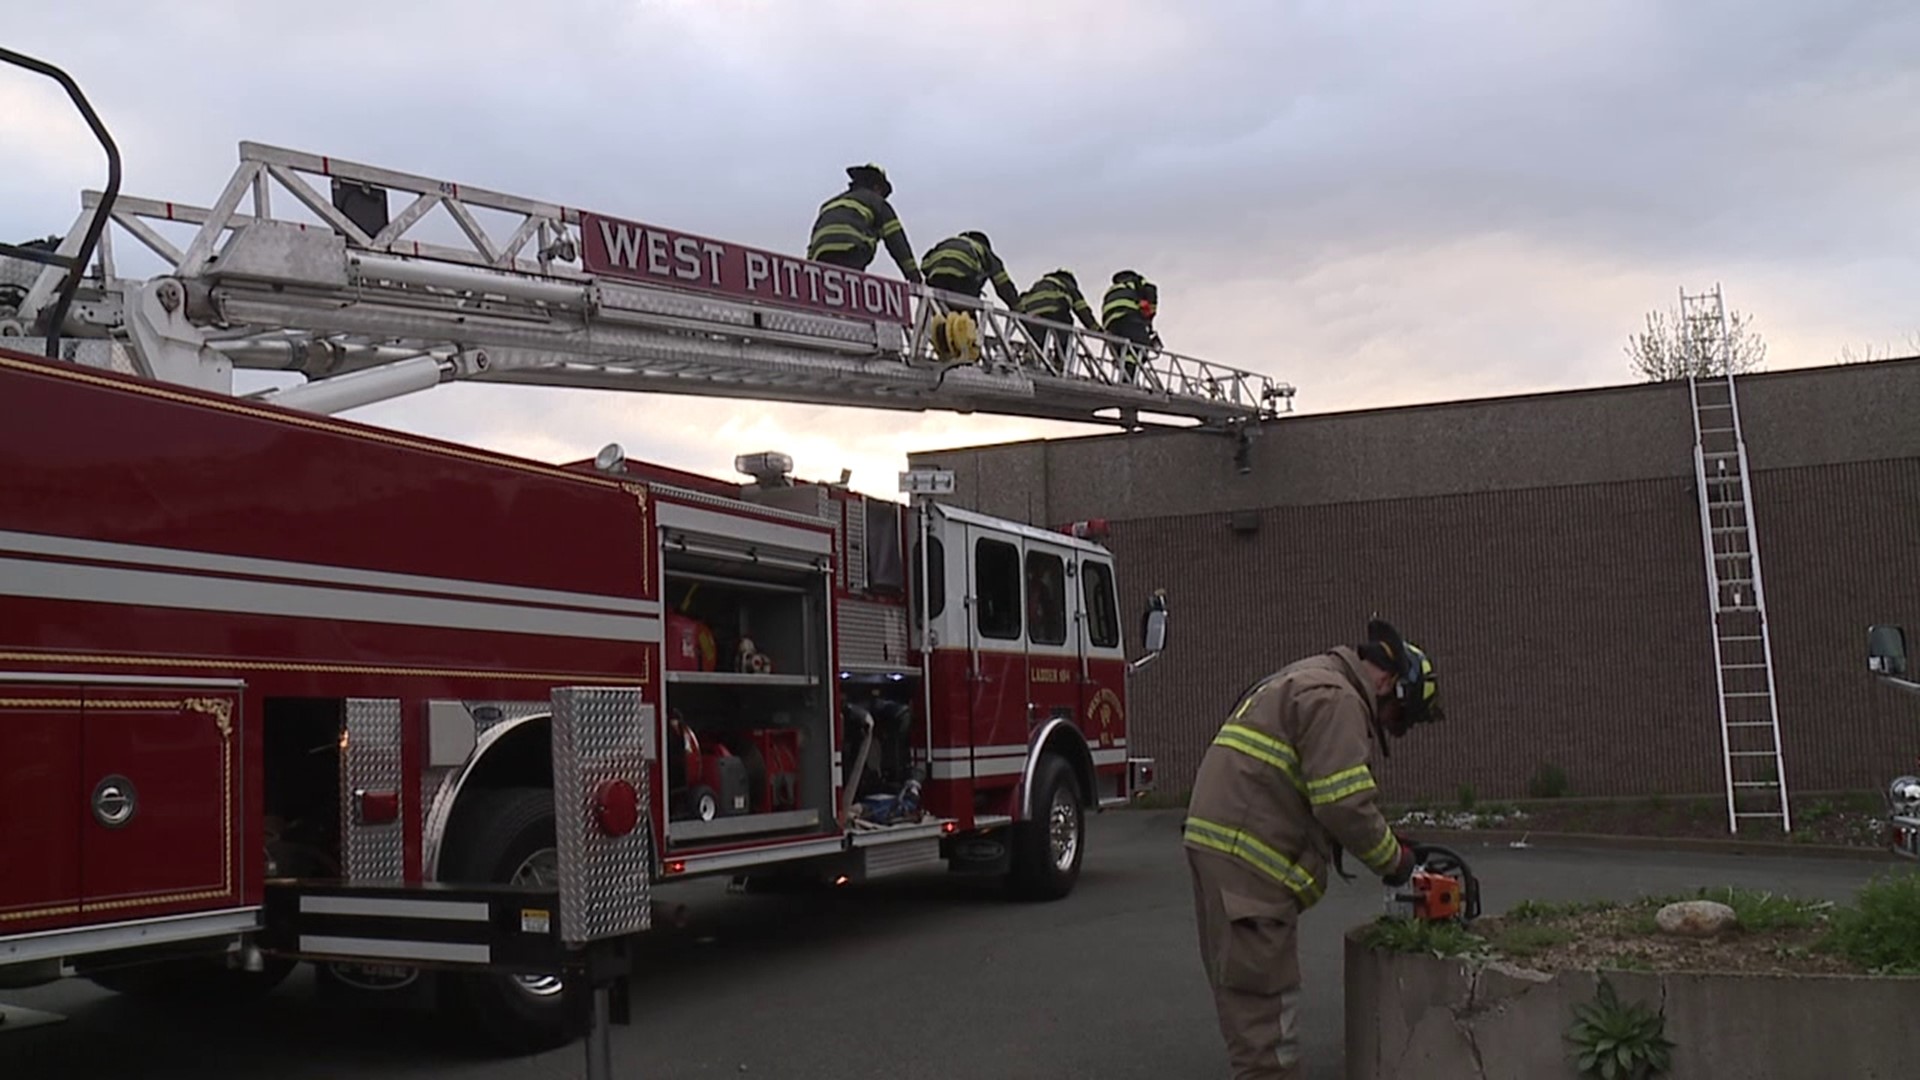 The firefighters from five different companies used the Via Appia building to conduct their exercises.